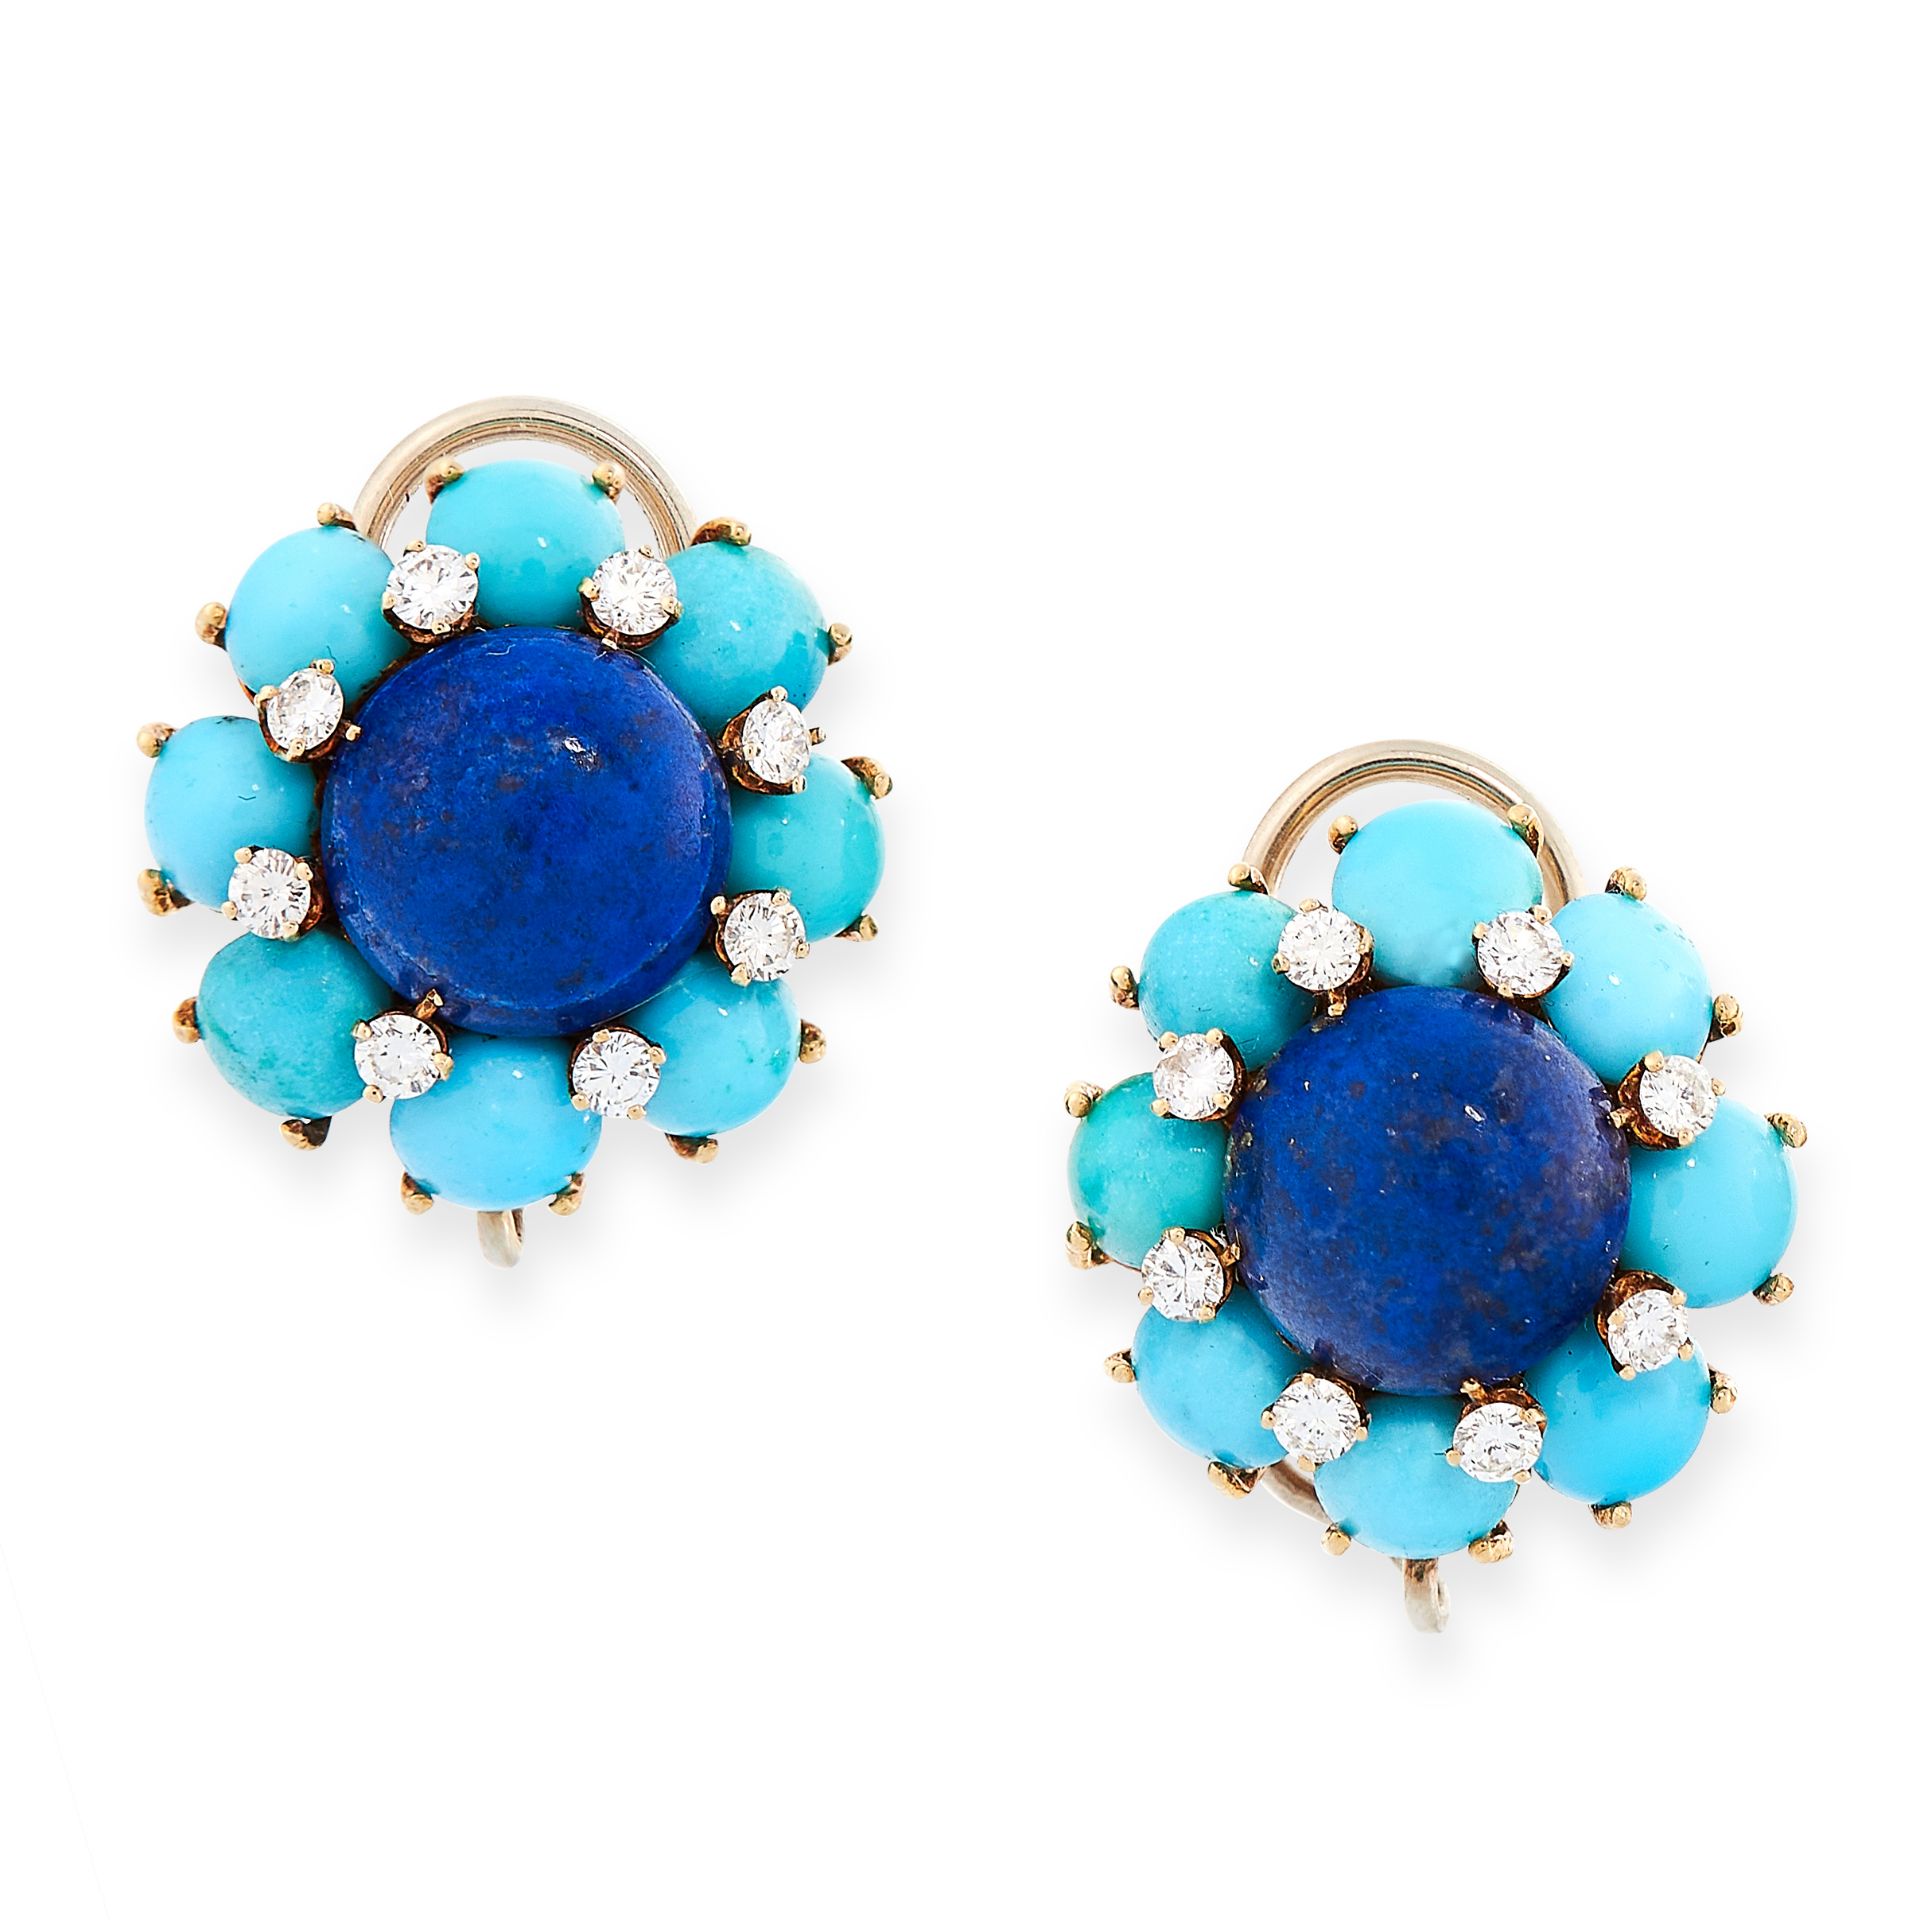 A PAIR OF VINTAGE LAPIS LAZULI, TURQUOISE AND DIAMOND CLIP EARRINGS, CARTIER in cluster form, set